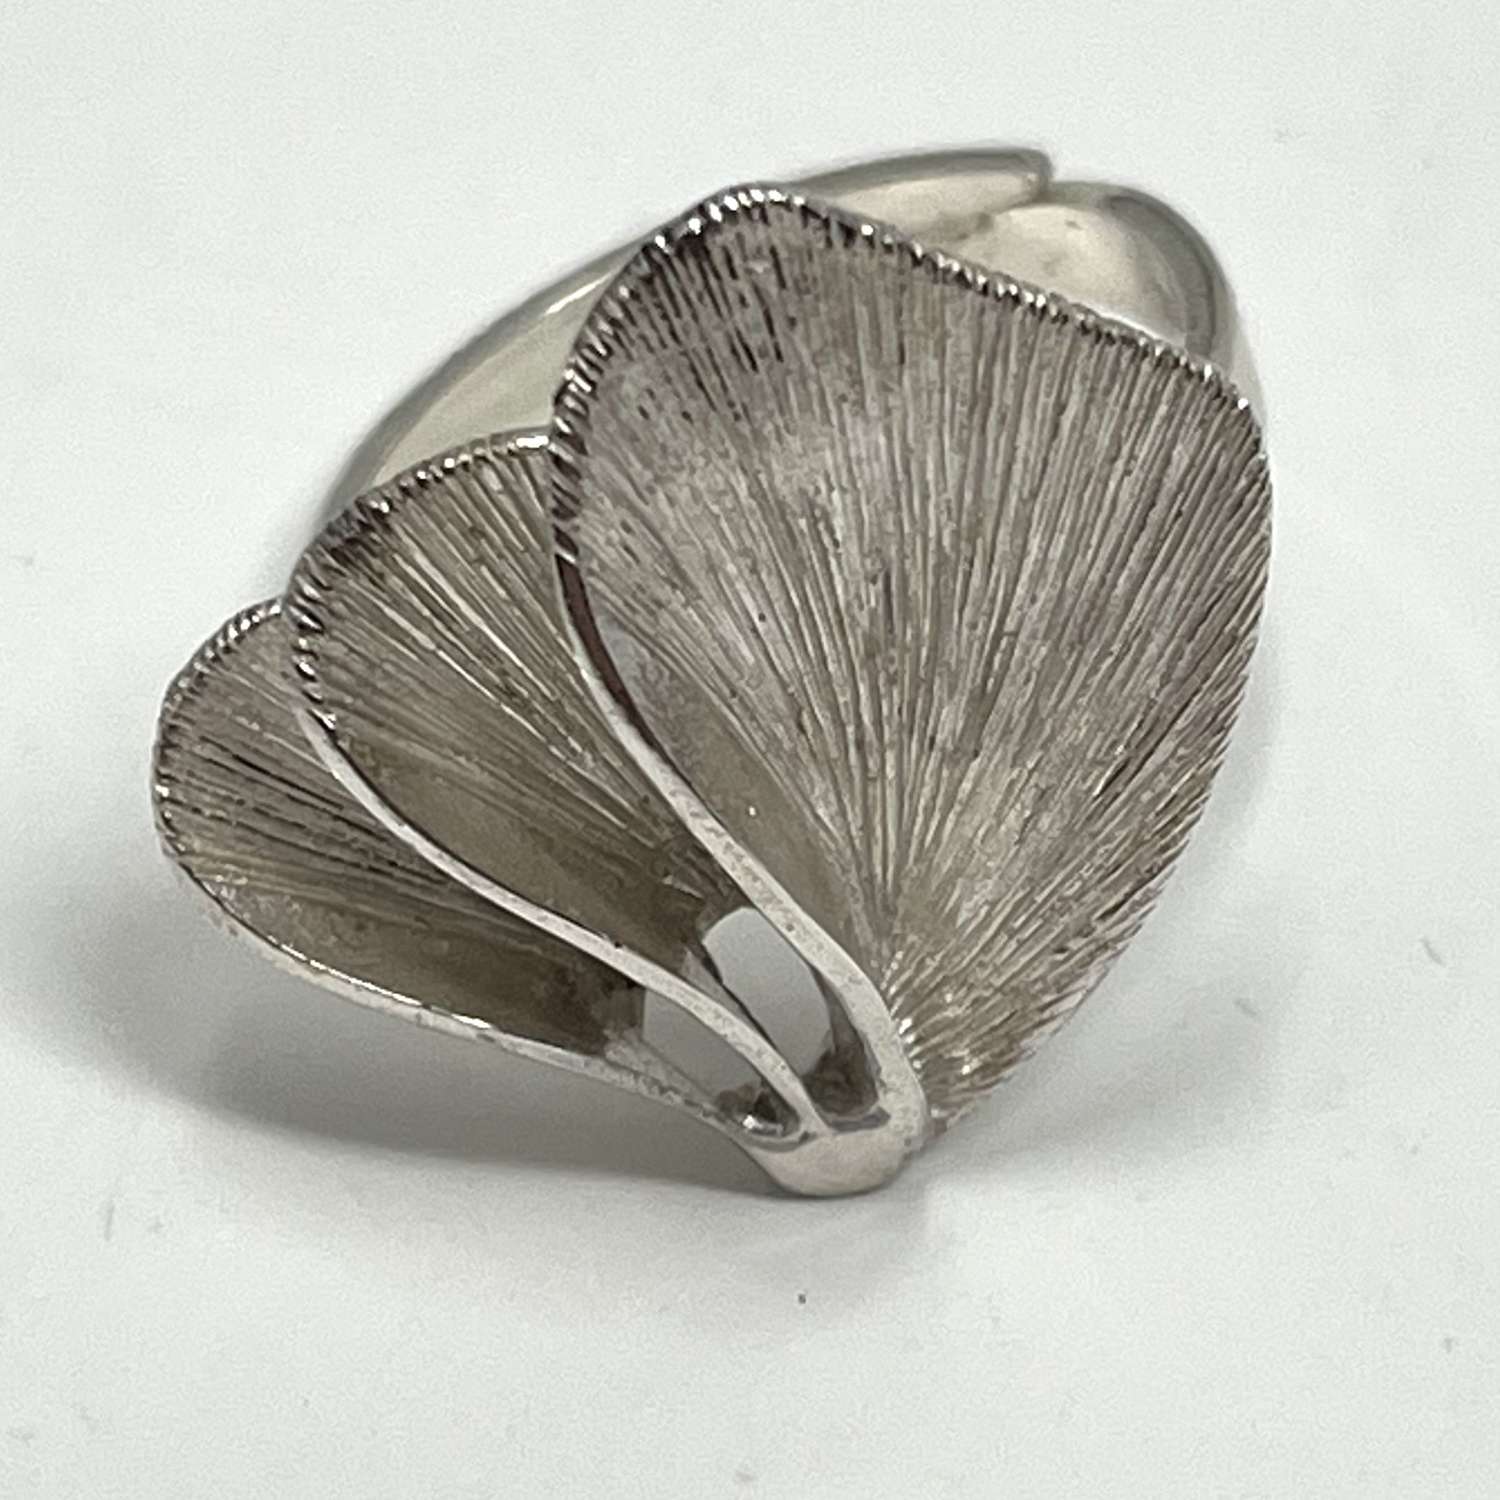 Adjustable silver ring by Valo Koru, Finland c 1970s